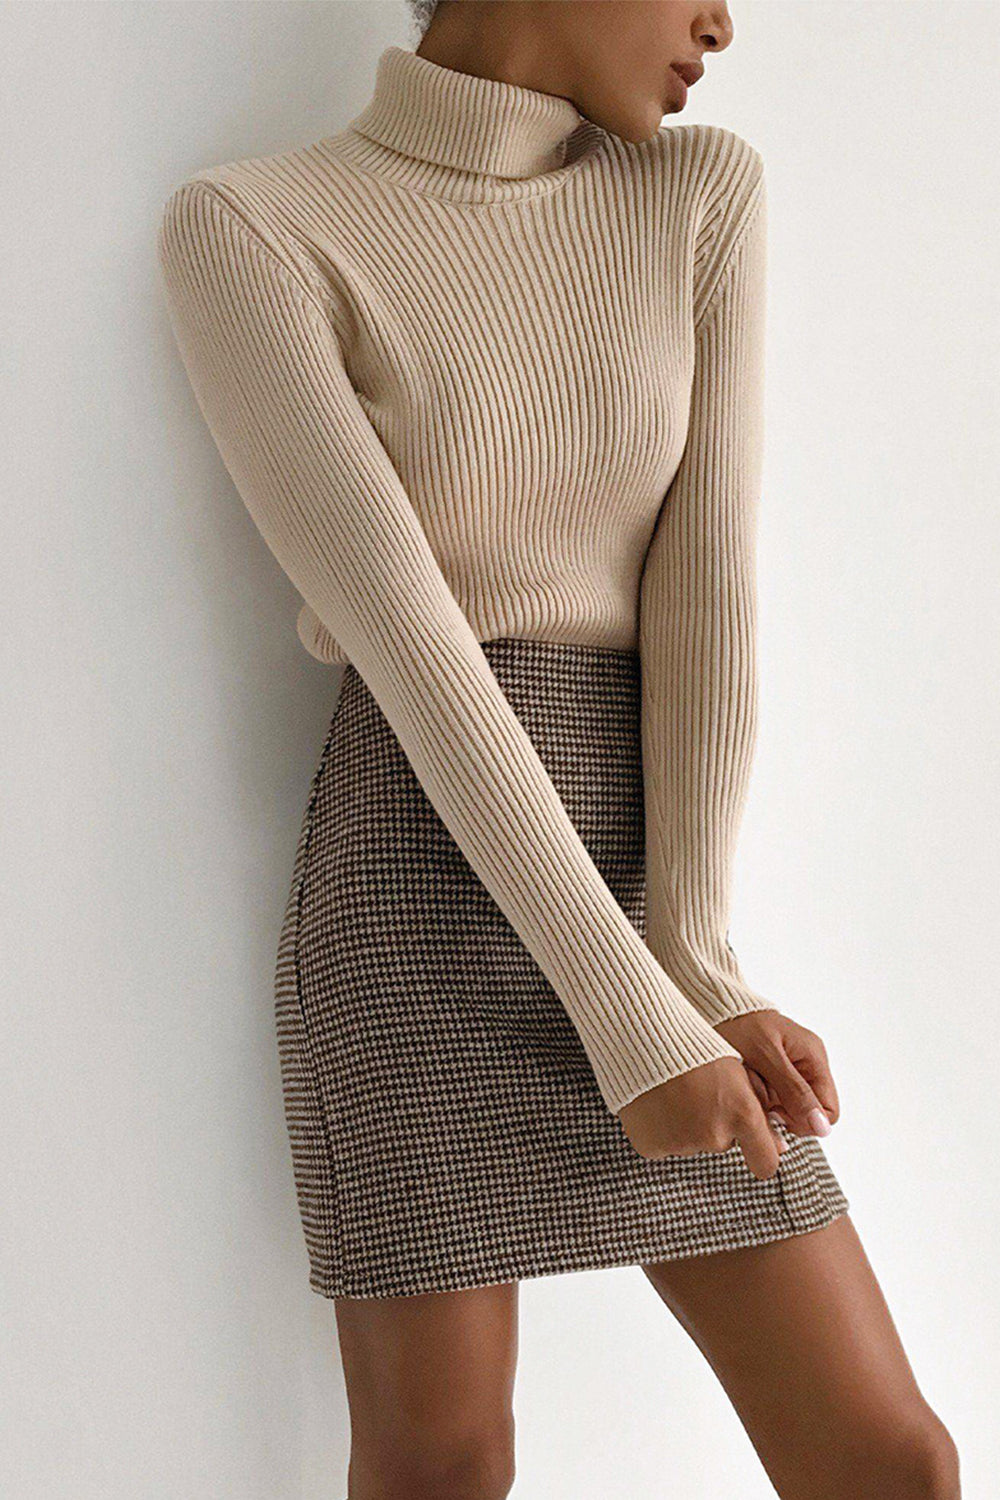 Classic Turtle Neck Sweater - ONLINE EXCLUSIVE